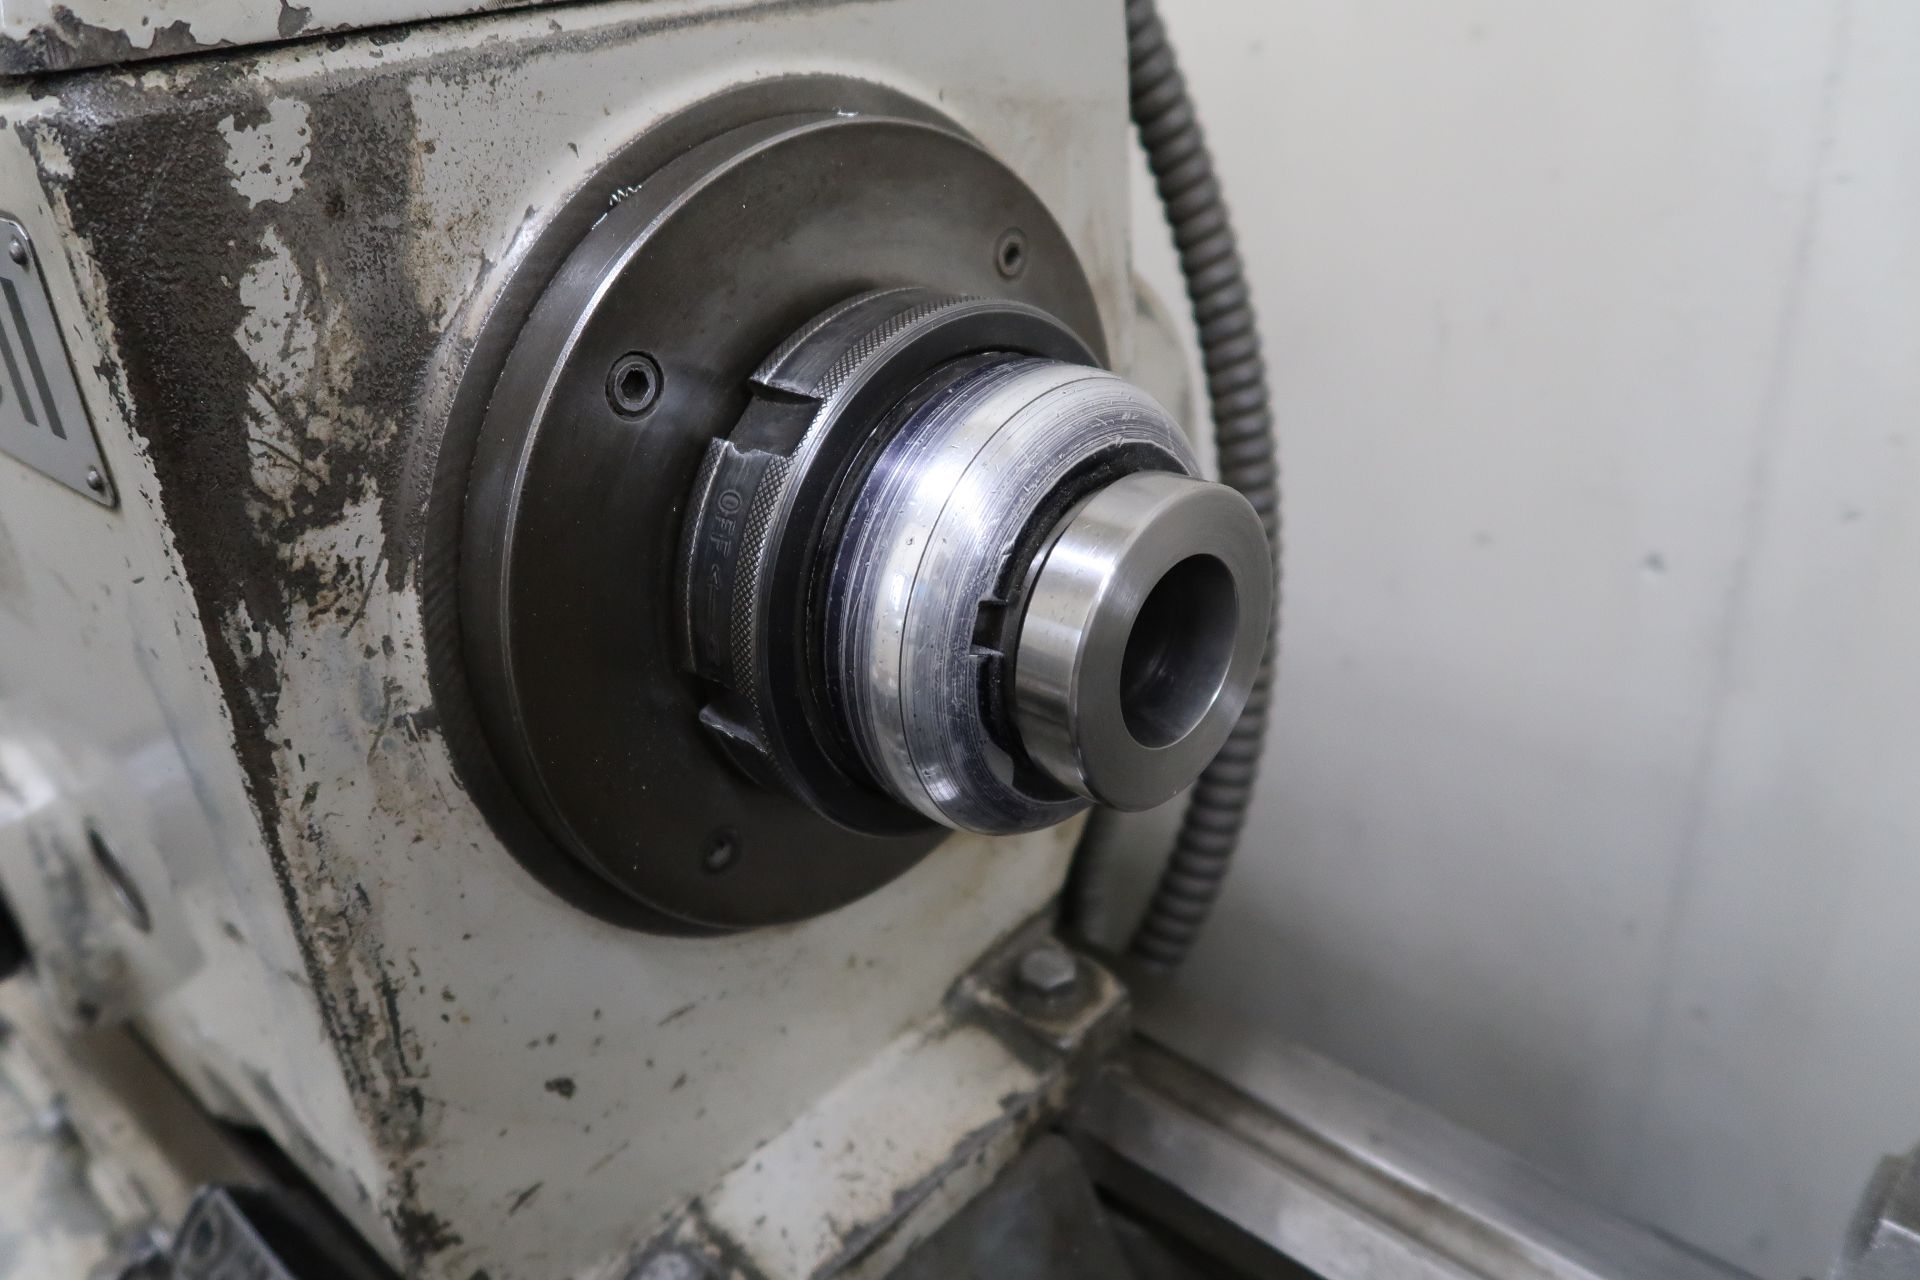 Rockwell “Delta 14” 14” x 45” Lathe s/n 1403561 w 40-1600 Adjustable RPM, (SOLD AS IS) - Image 3 of 9